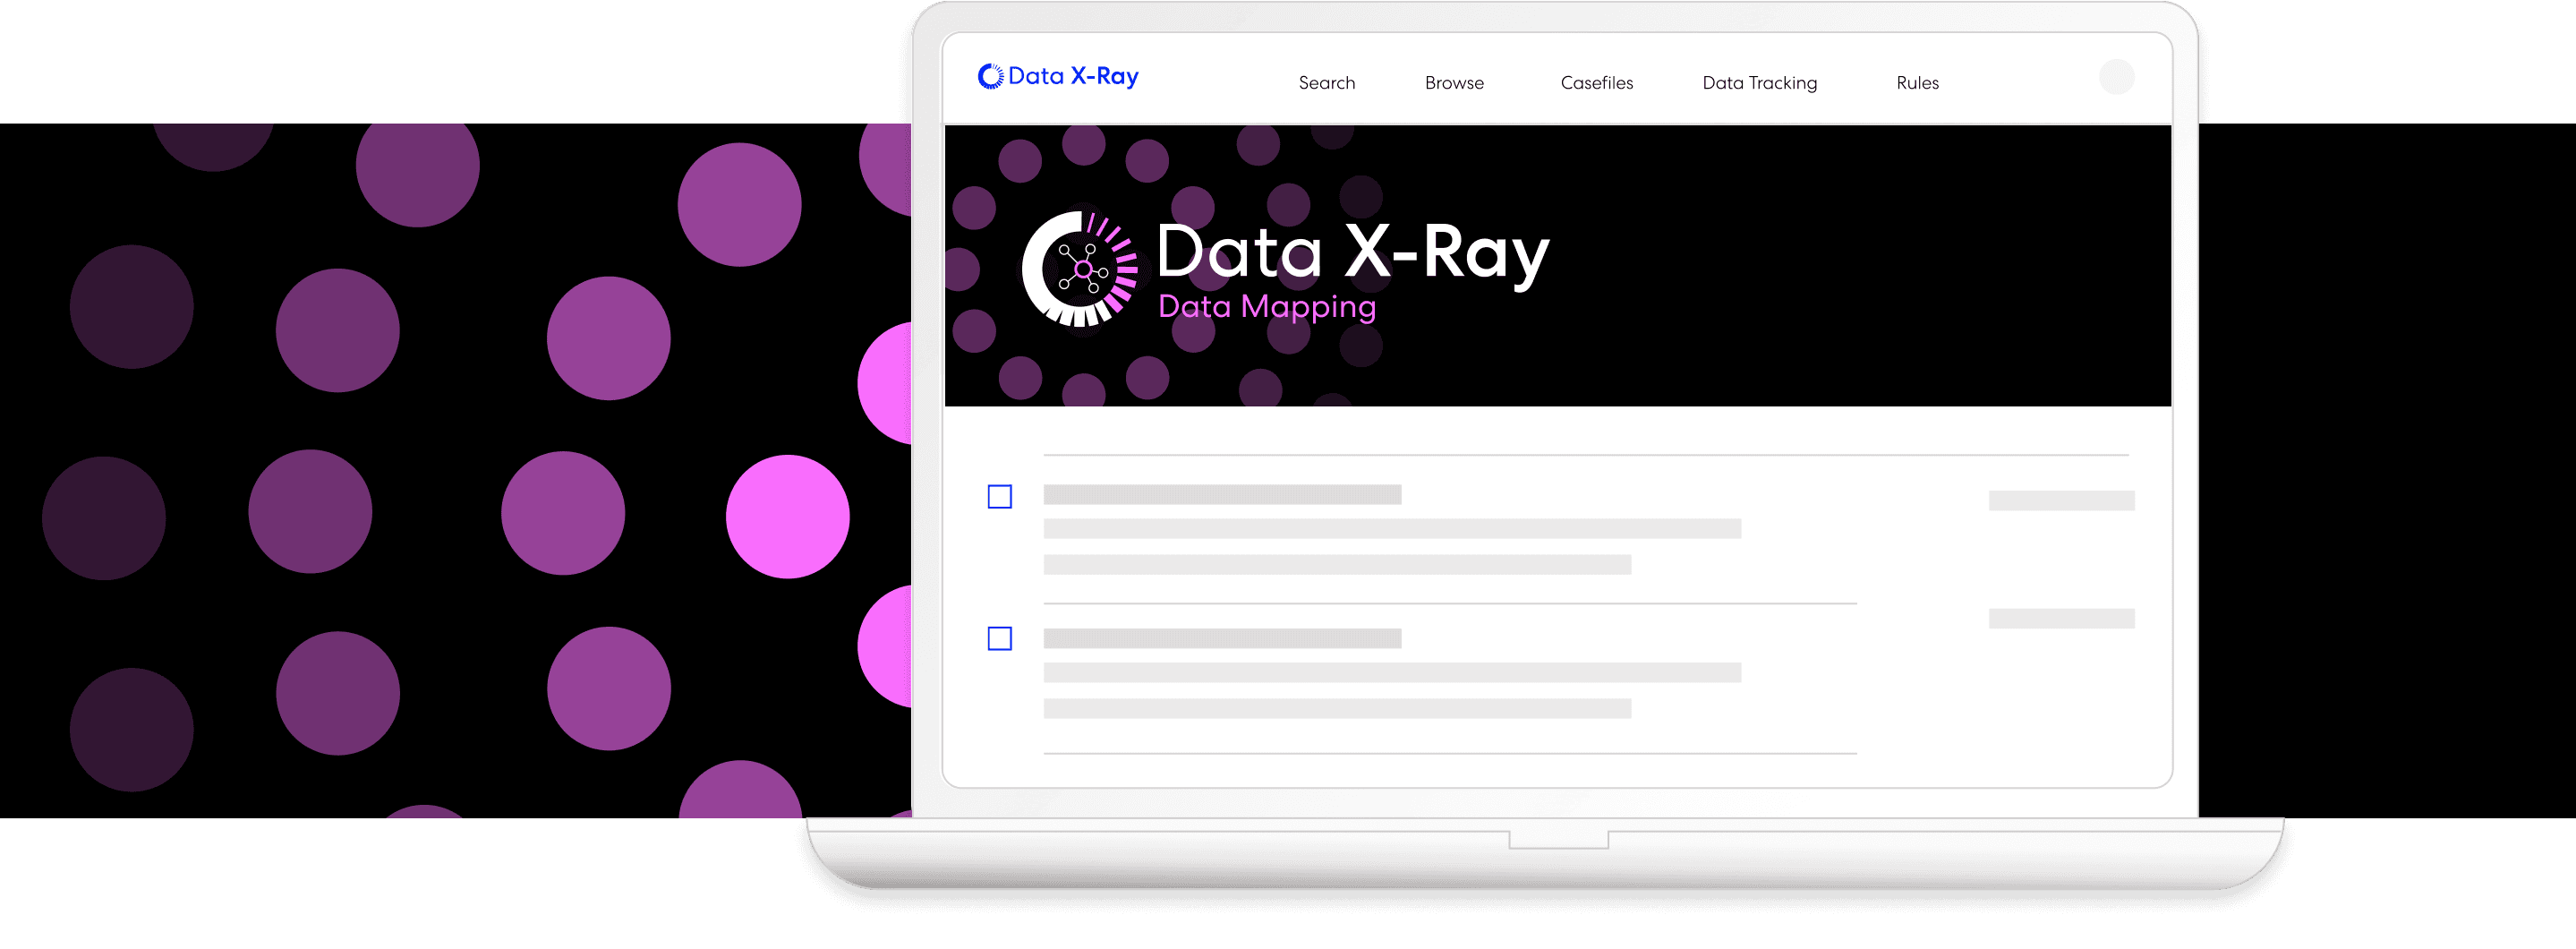 Data X-Ray for Data Mapping Horizontal Banner